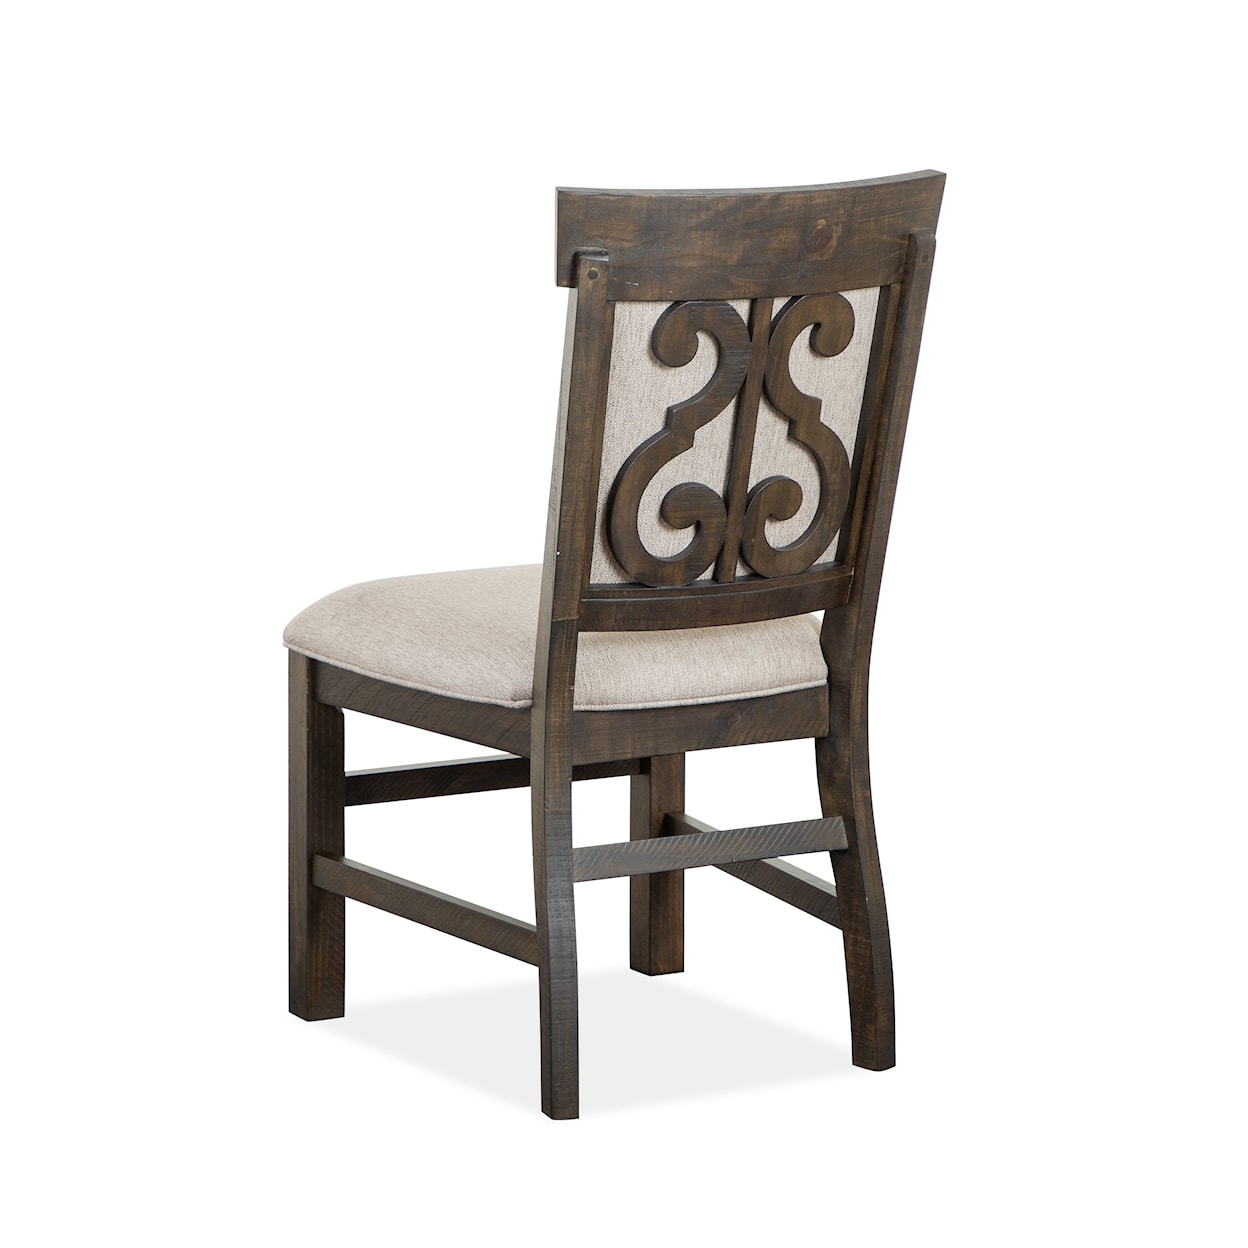 Magnussen Home Bellamy Dining Dining Side Chair